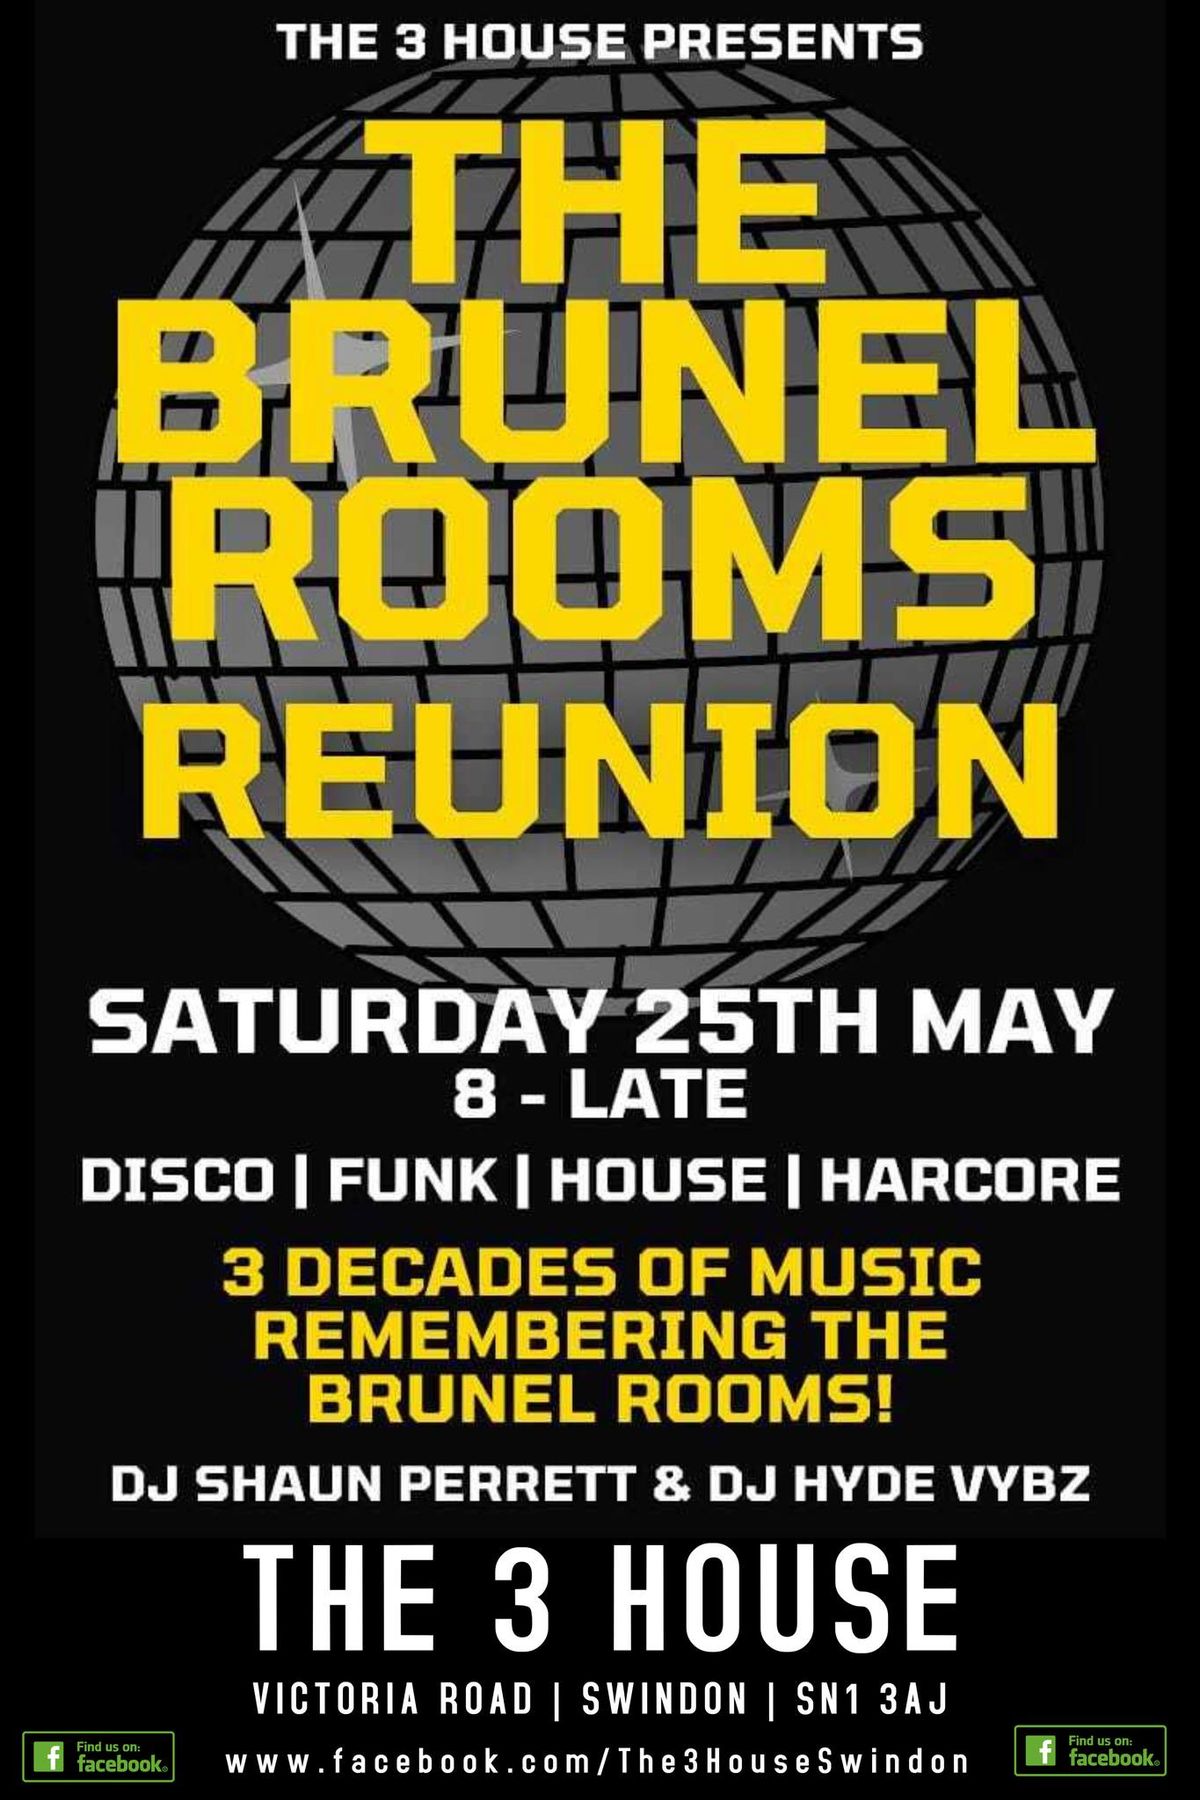 Brunel Rooms Reunion @The 3 House